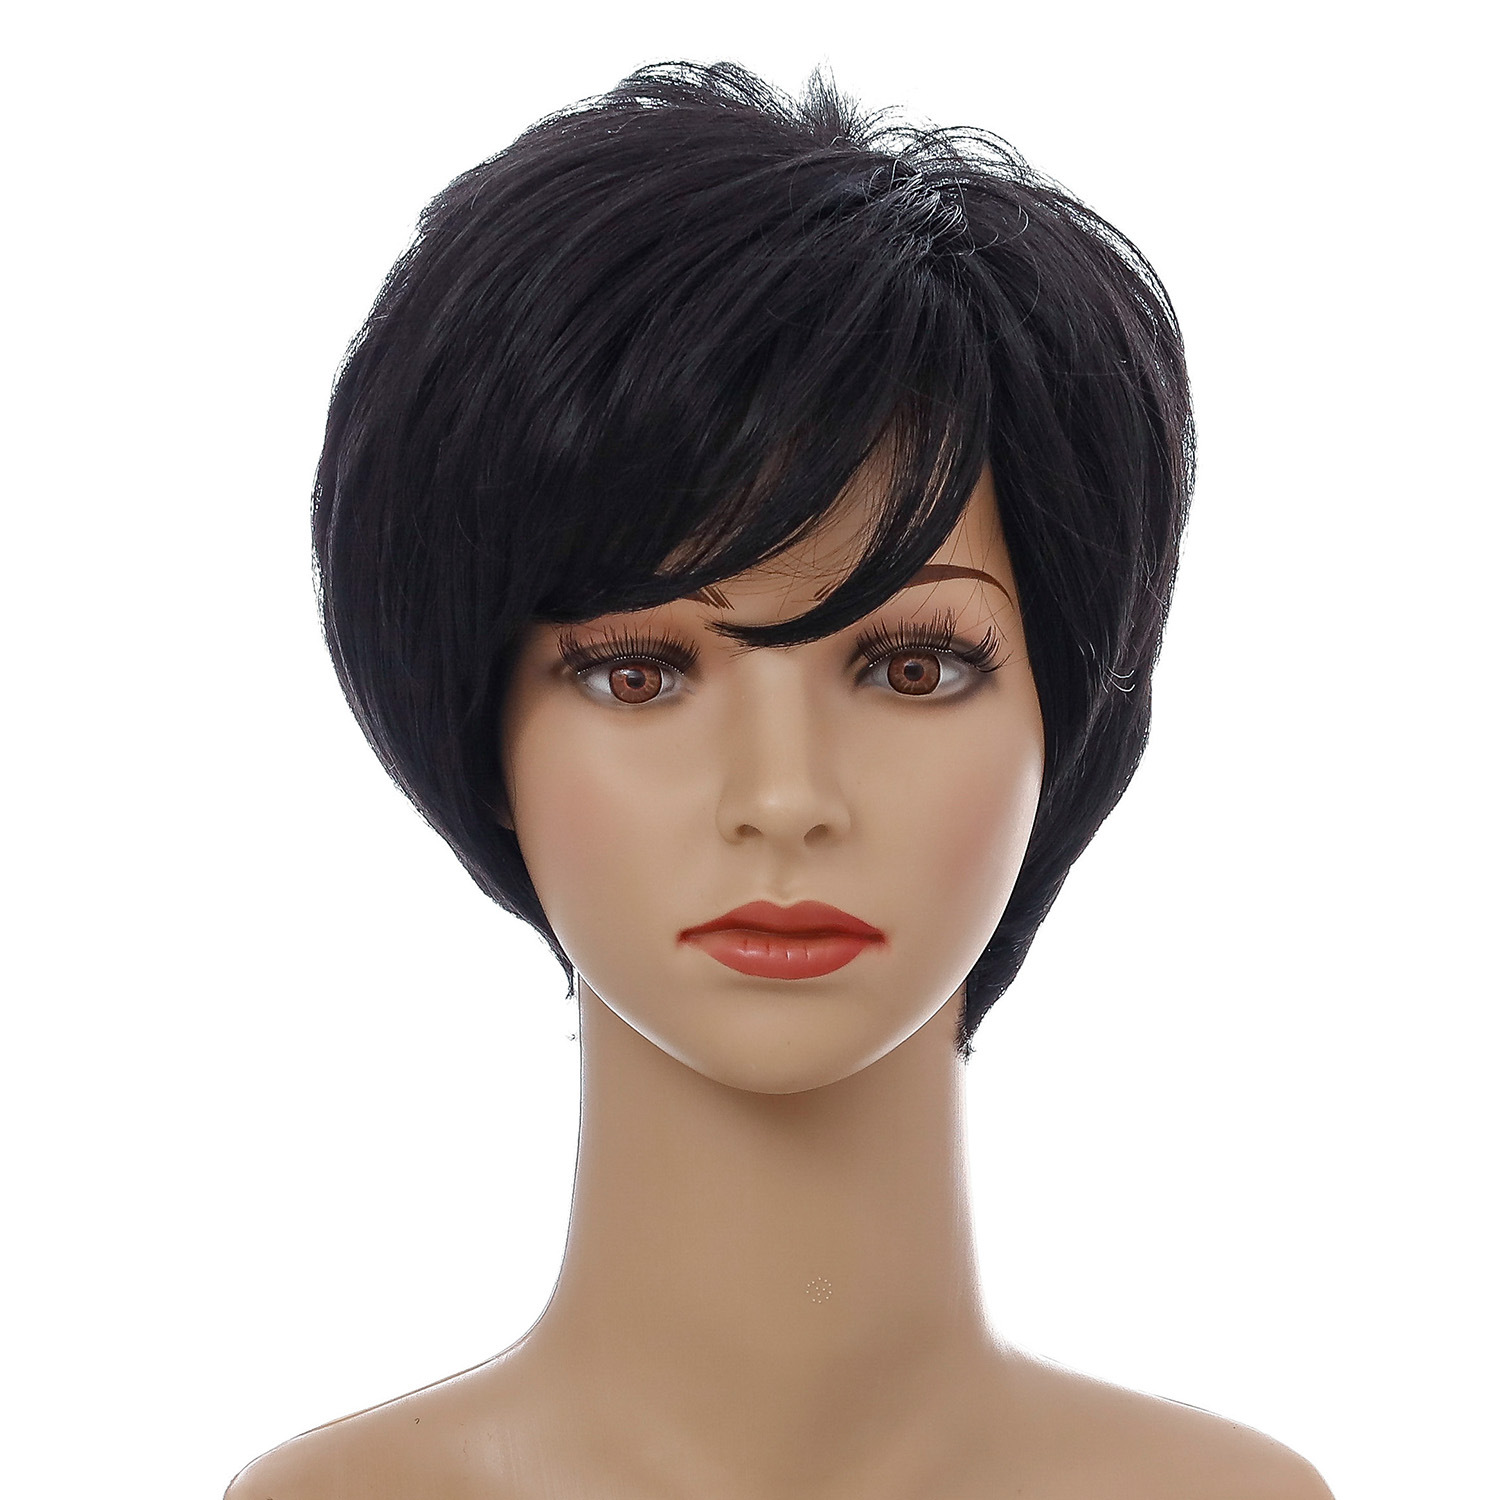 Stylish black synthetic wig with short straight hair, designed for women